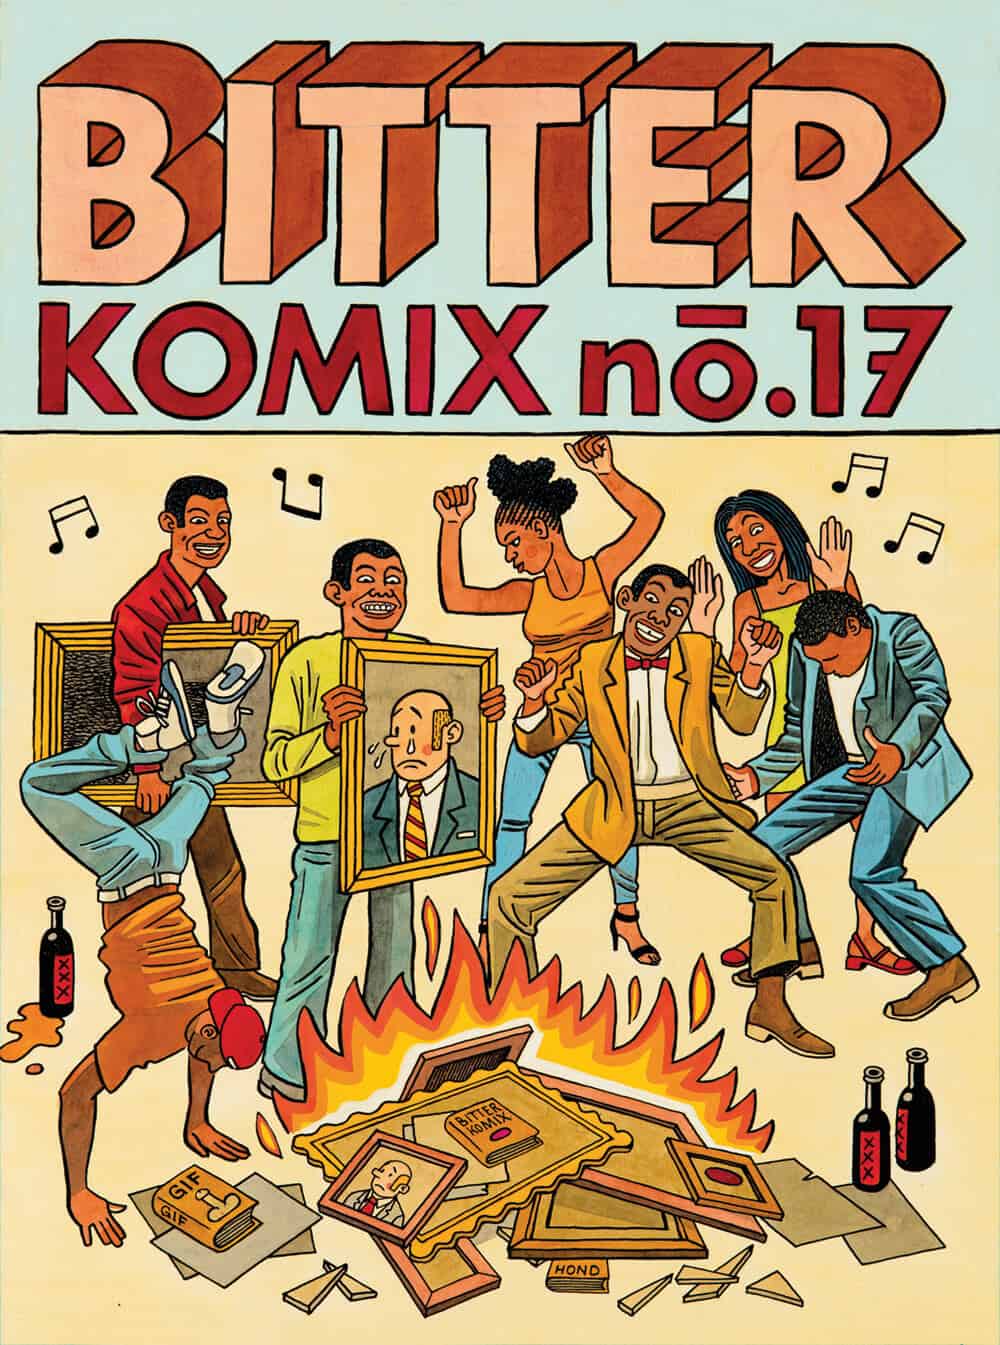 Cover image of Anton Kannemeyer and Conrad Botes’ Bittercomix No.17, 2016. Image courtesy of the artists.